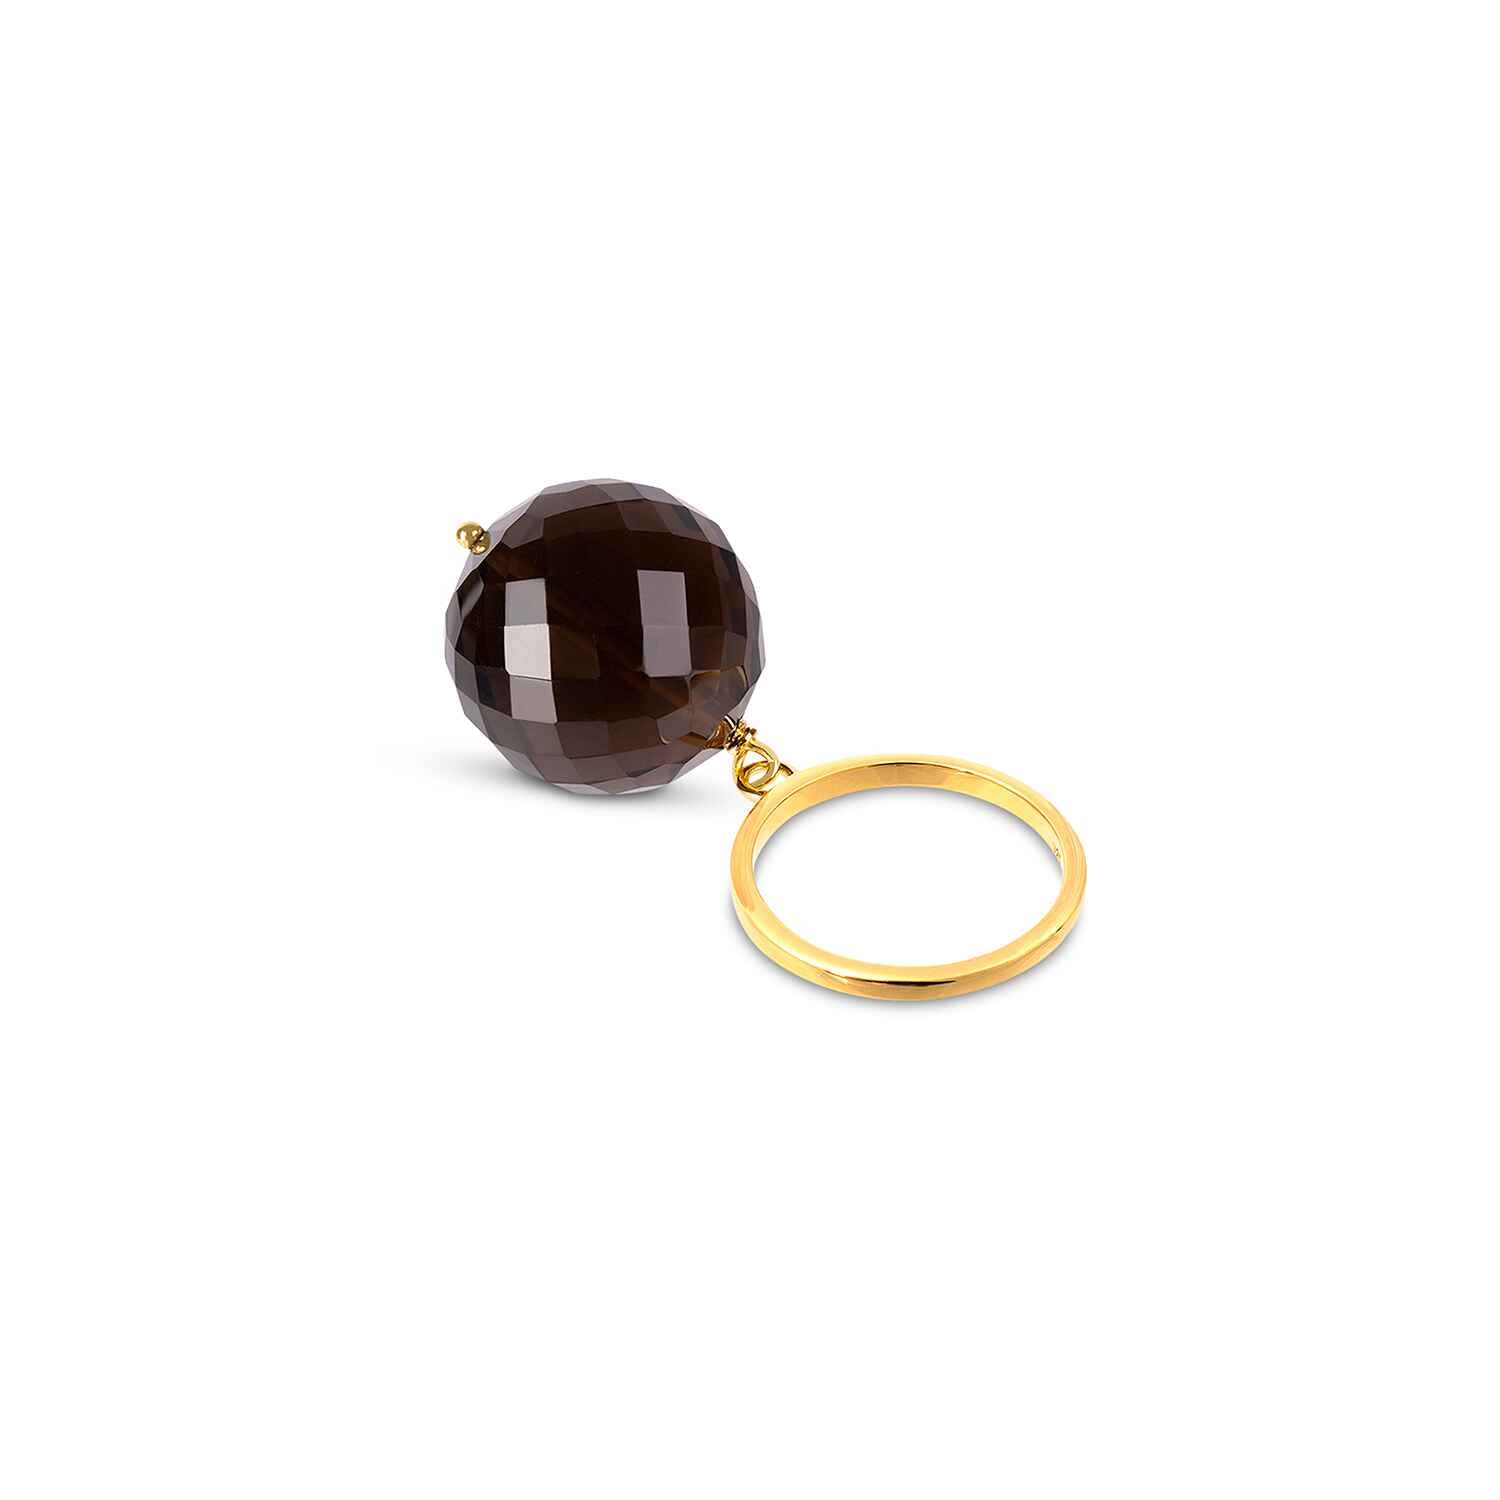 The Bubble Smokey Quartz Ring features a translucent variety of quartz that ranges in clarity from almost complete transparency to an almost-opaque brownish-grey crystal. The perfectly round gemstone is recycled from a vintage jewellery piece and is attached to a fully size adjustable gold ring.